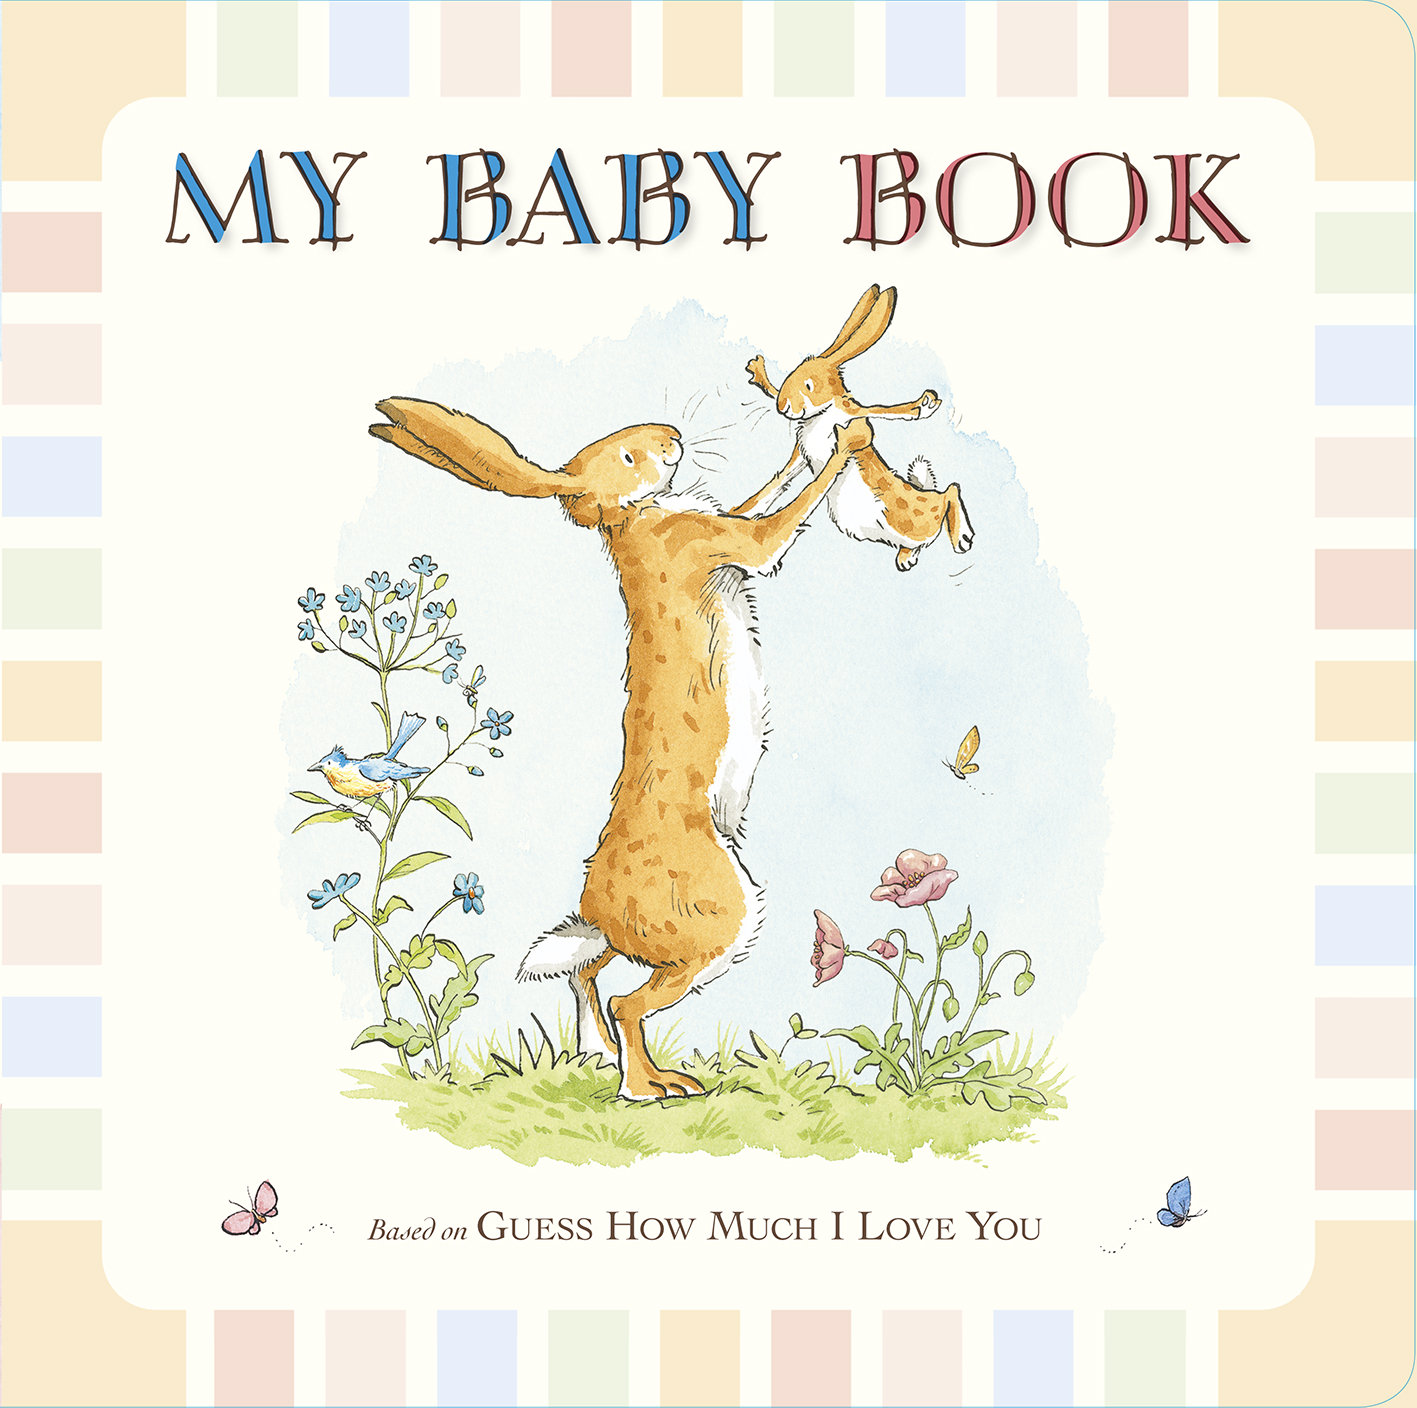 Guess-How-Much-I-Love-You-My-Baby-Book